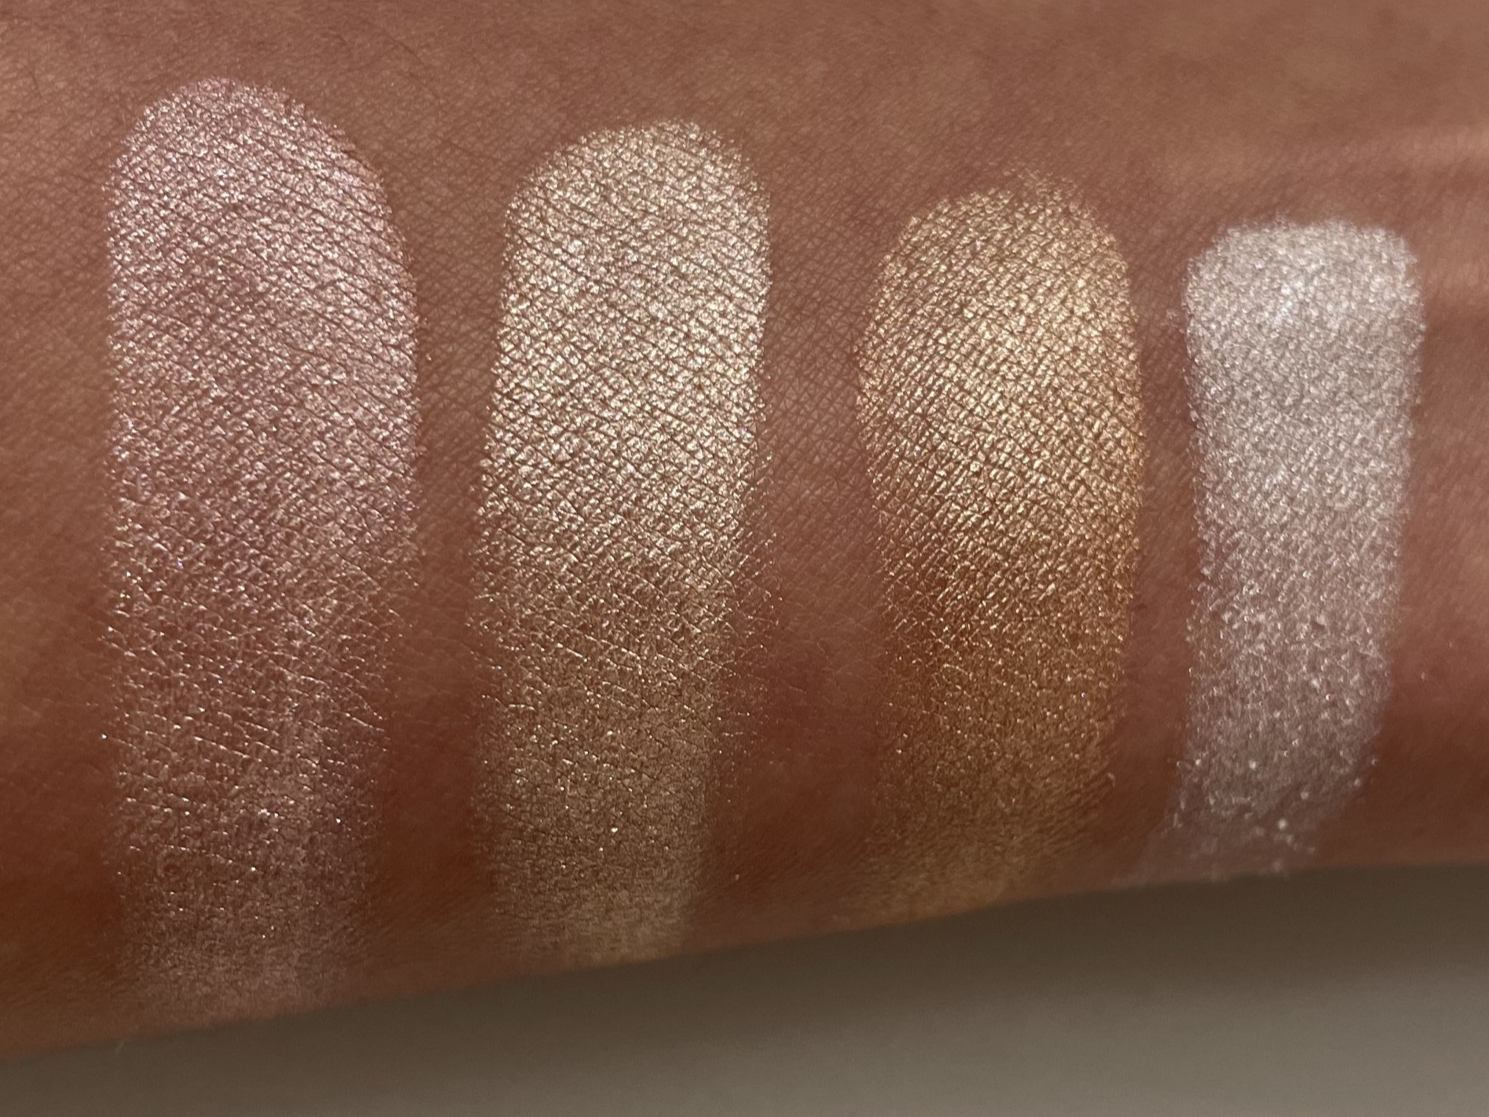 Rare Beauty Highlighter Swatch | Space NK